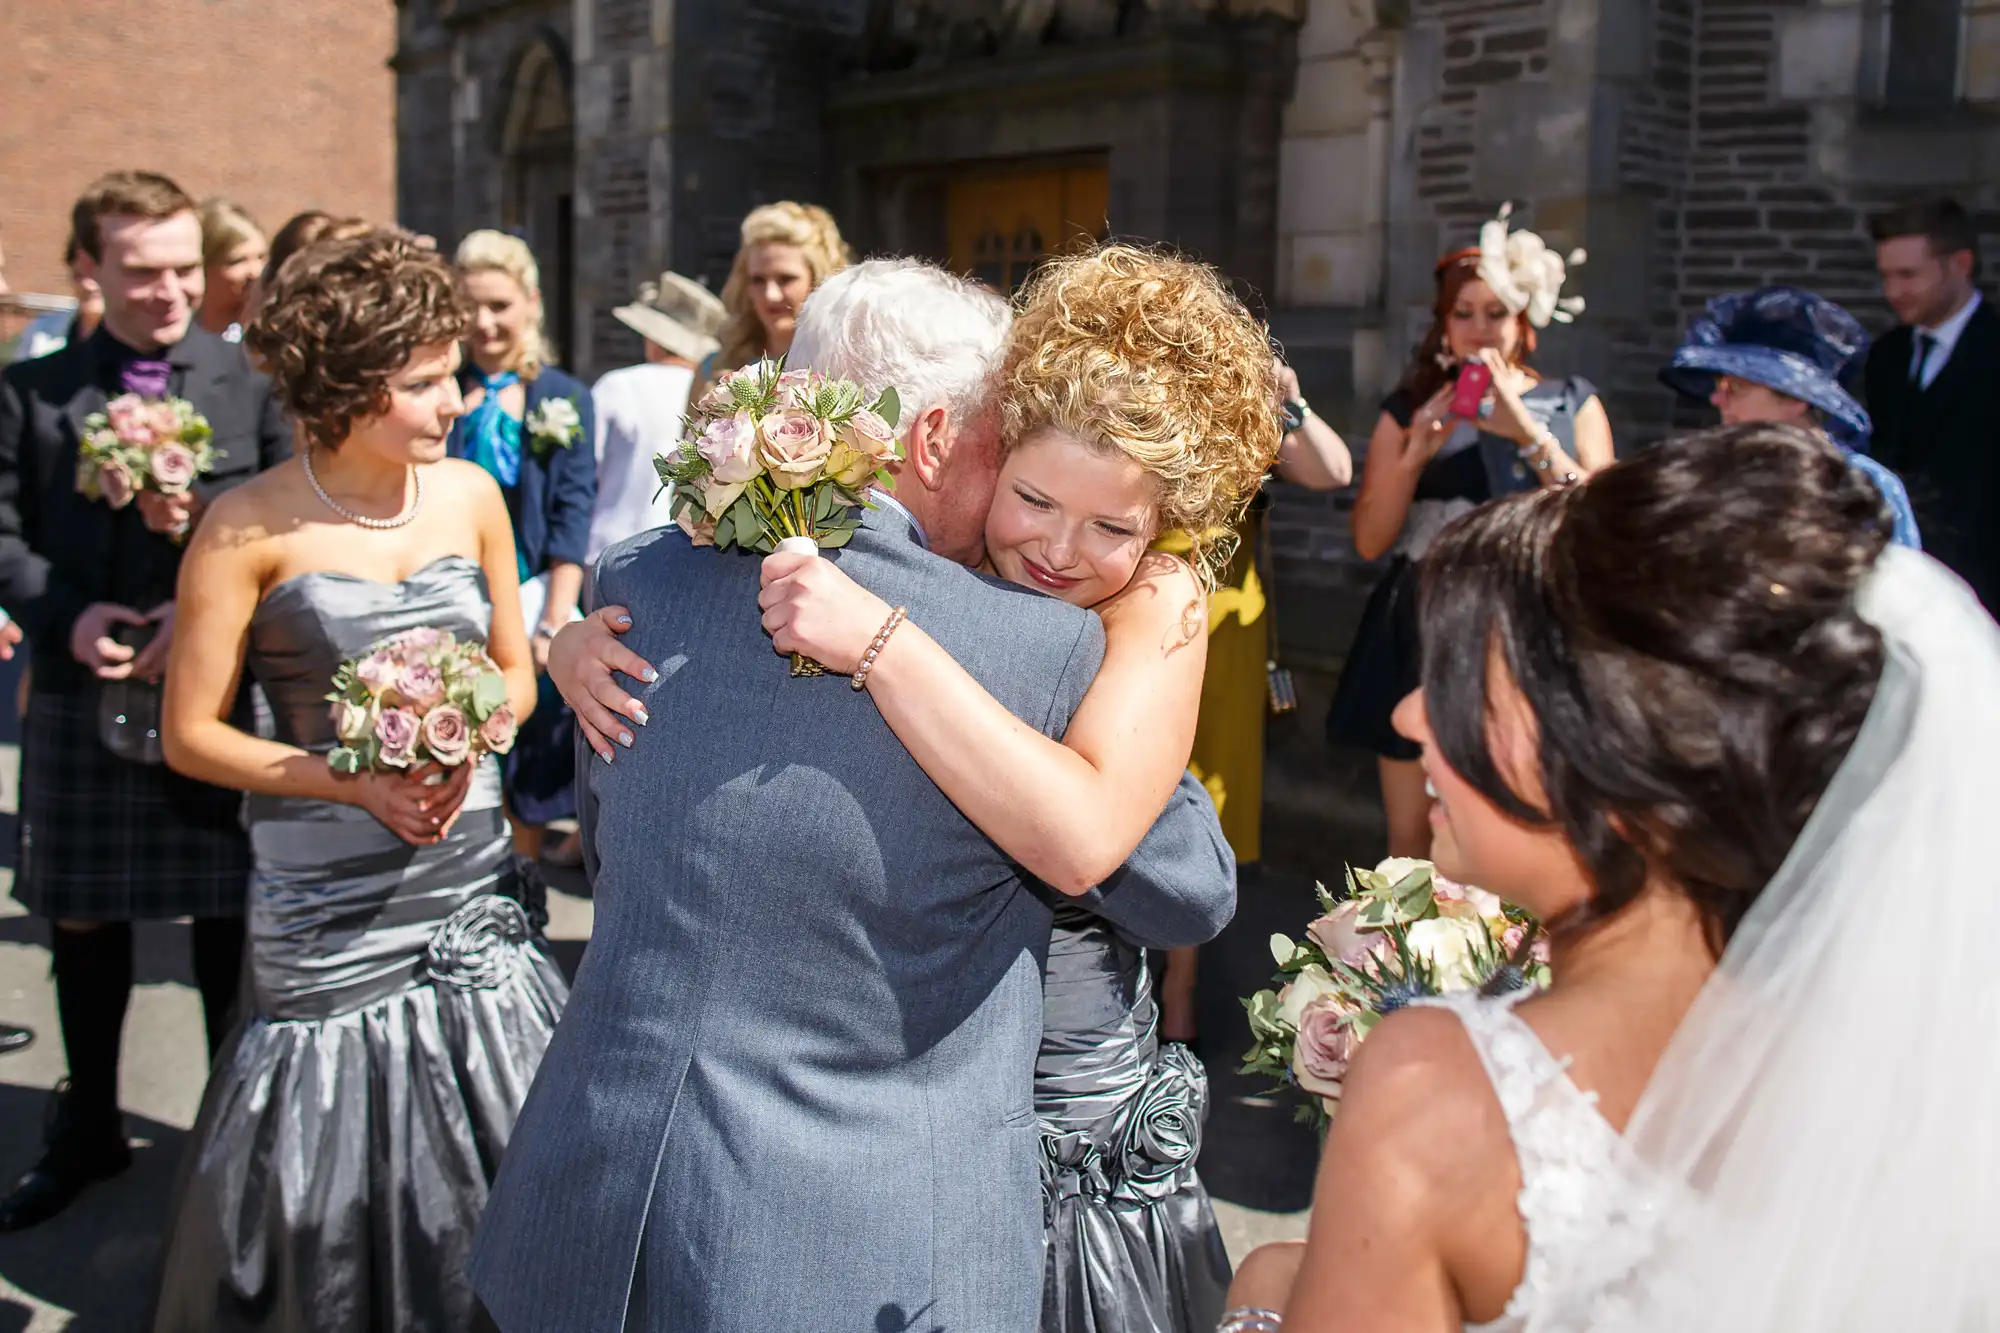 A joyful wedding scene where a woman hugs an older man amid guests, including a bride holding flowers on the right.